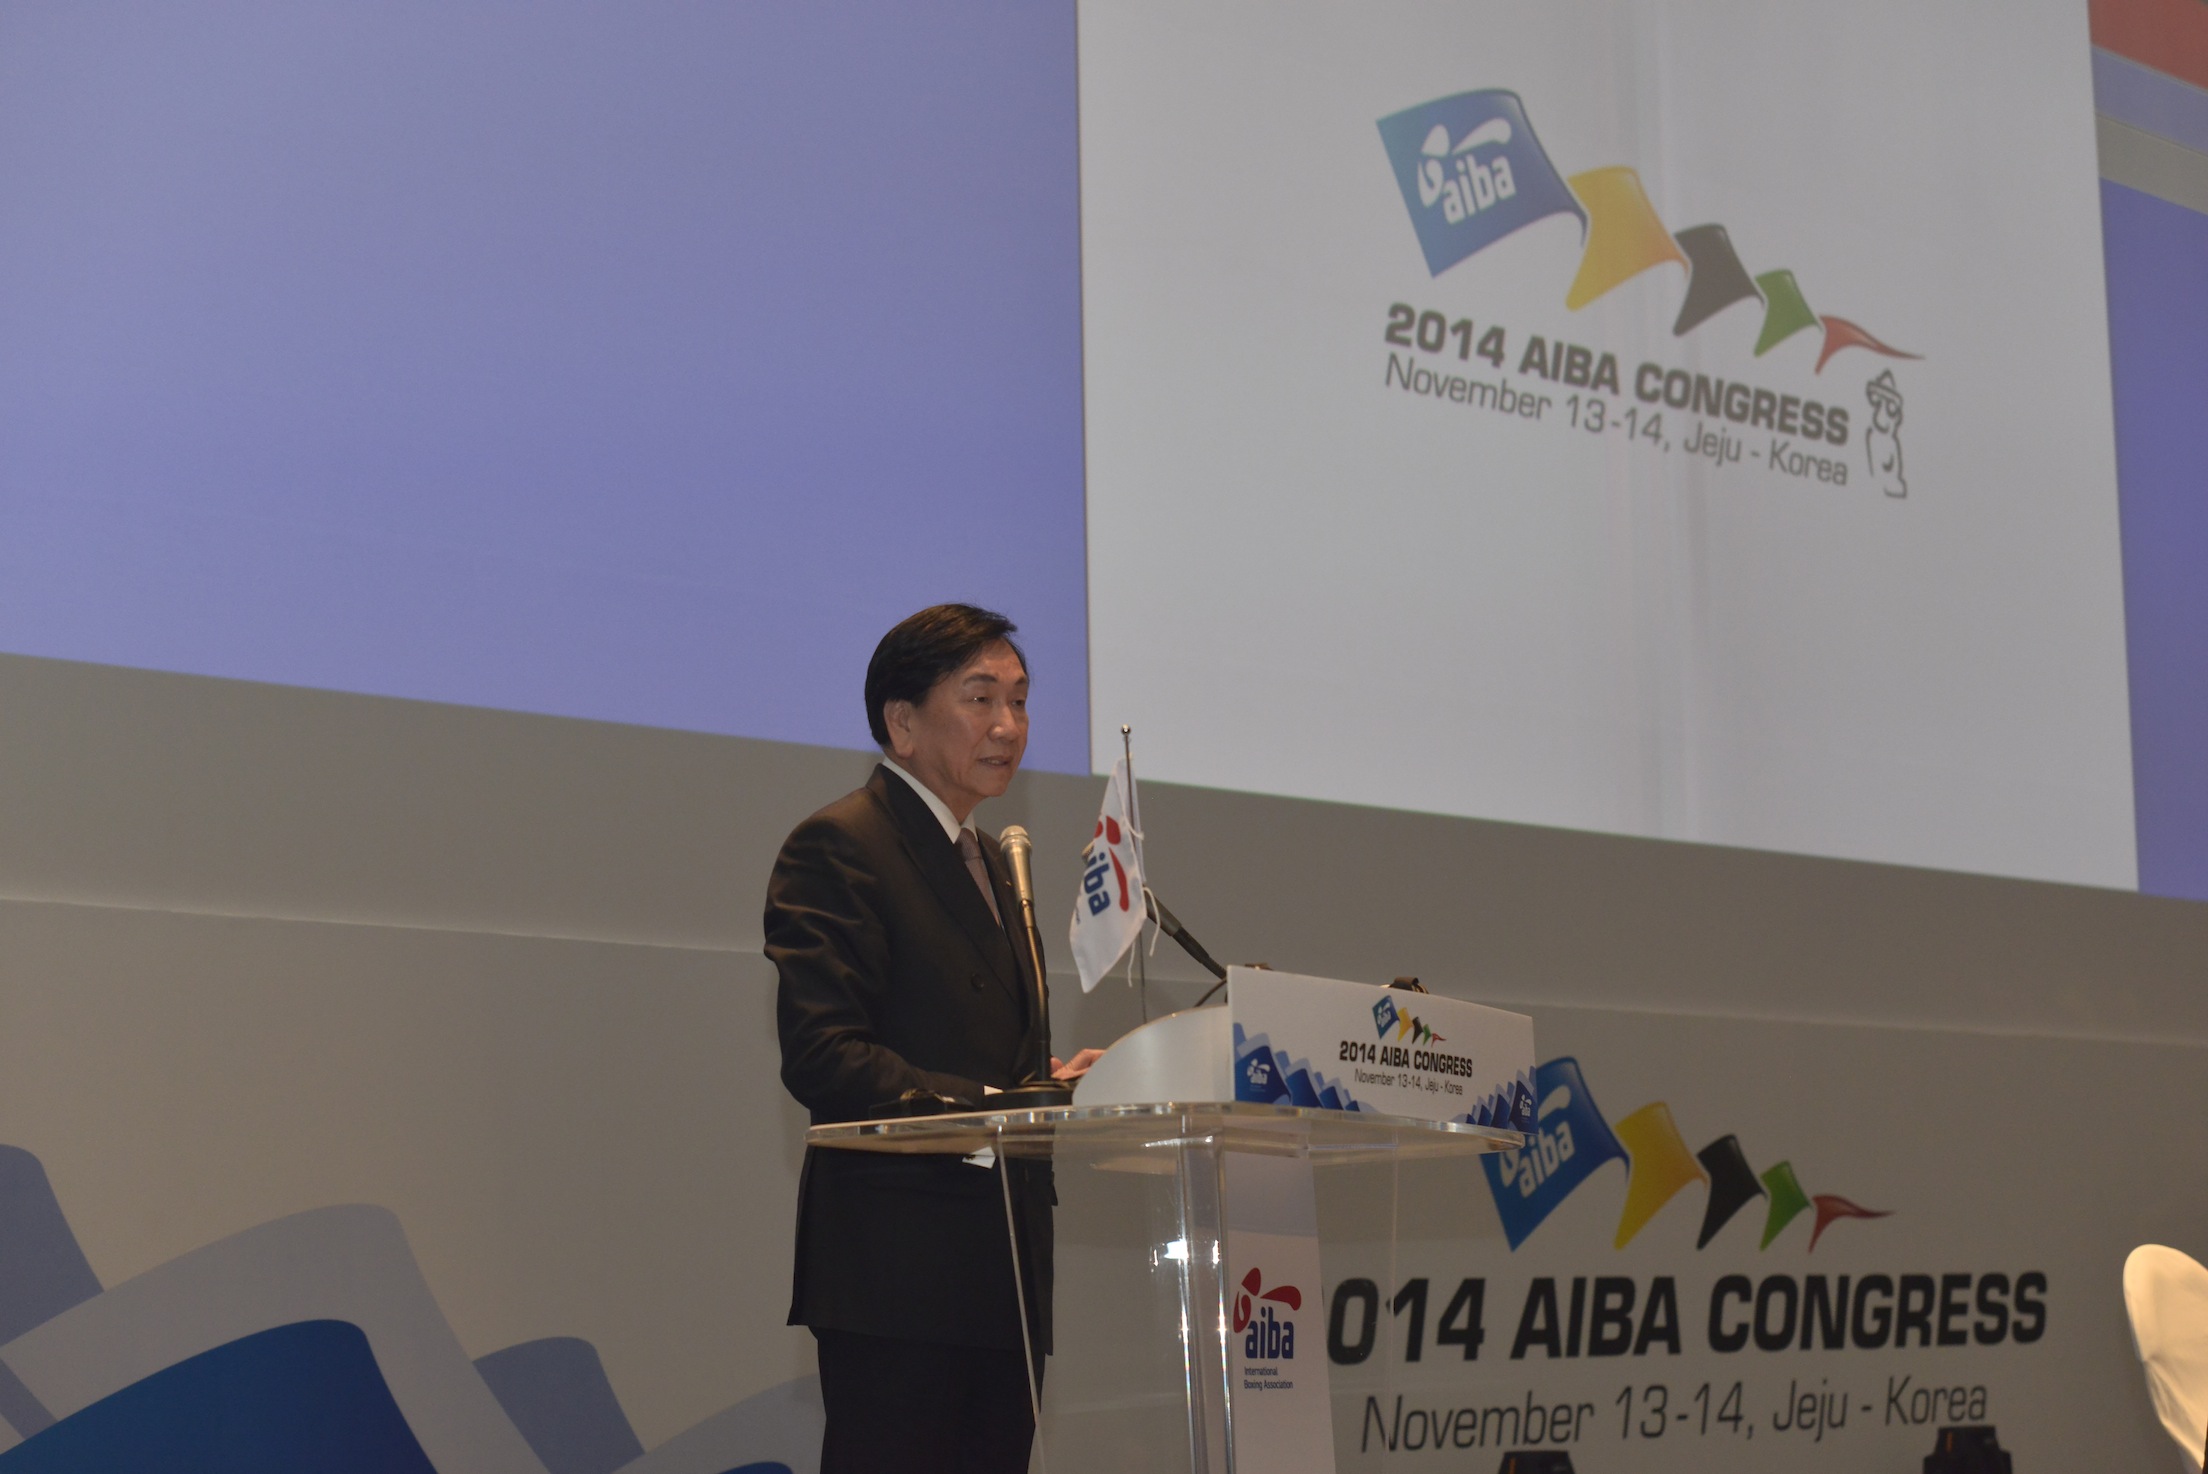 C K Wu launched the "Jeju Declaration" following his re-election as President of AIBA, setting out a number of goals he wants boxing to adhere too ©AIBA